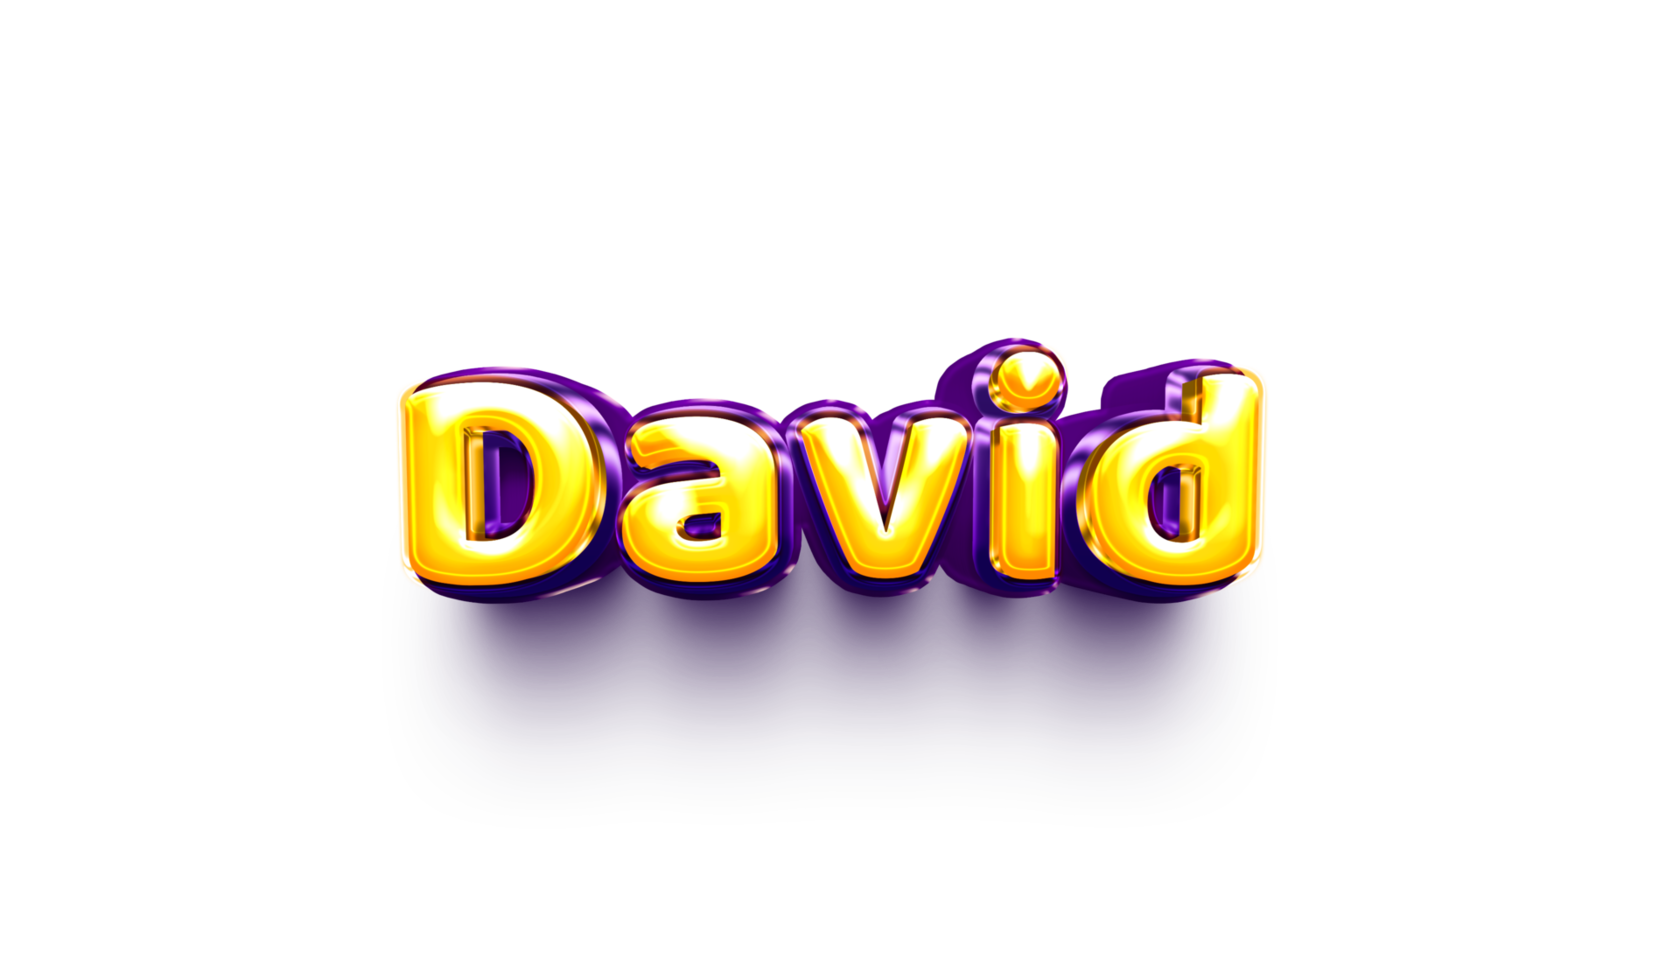 names of boy English helium balloon shiny celebration sticker 3d inflated David png